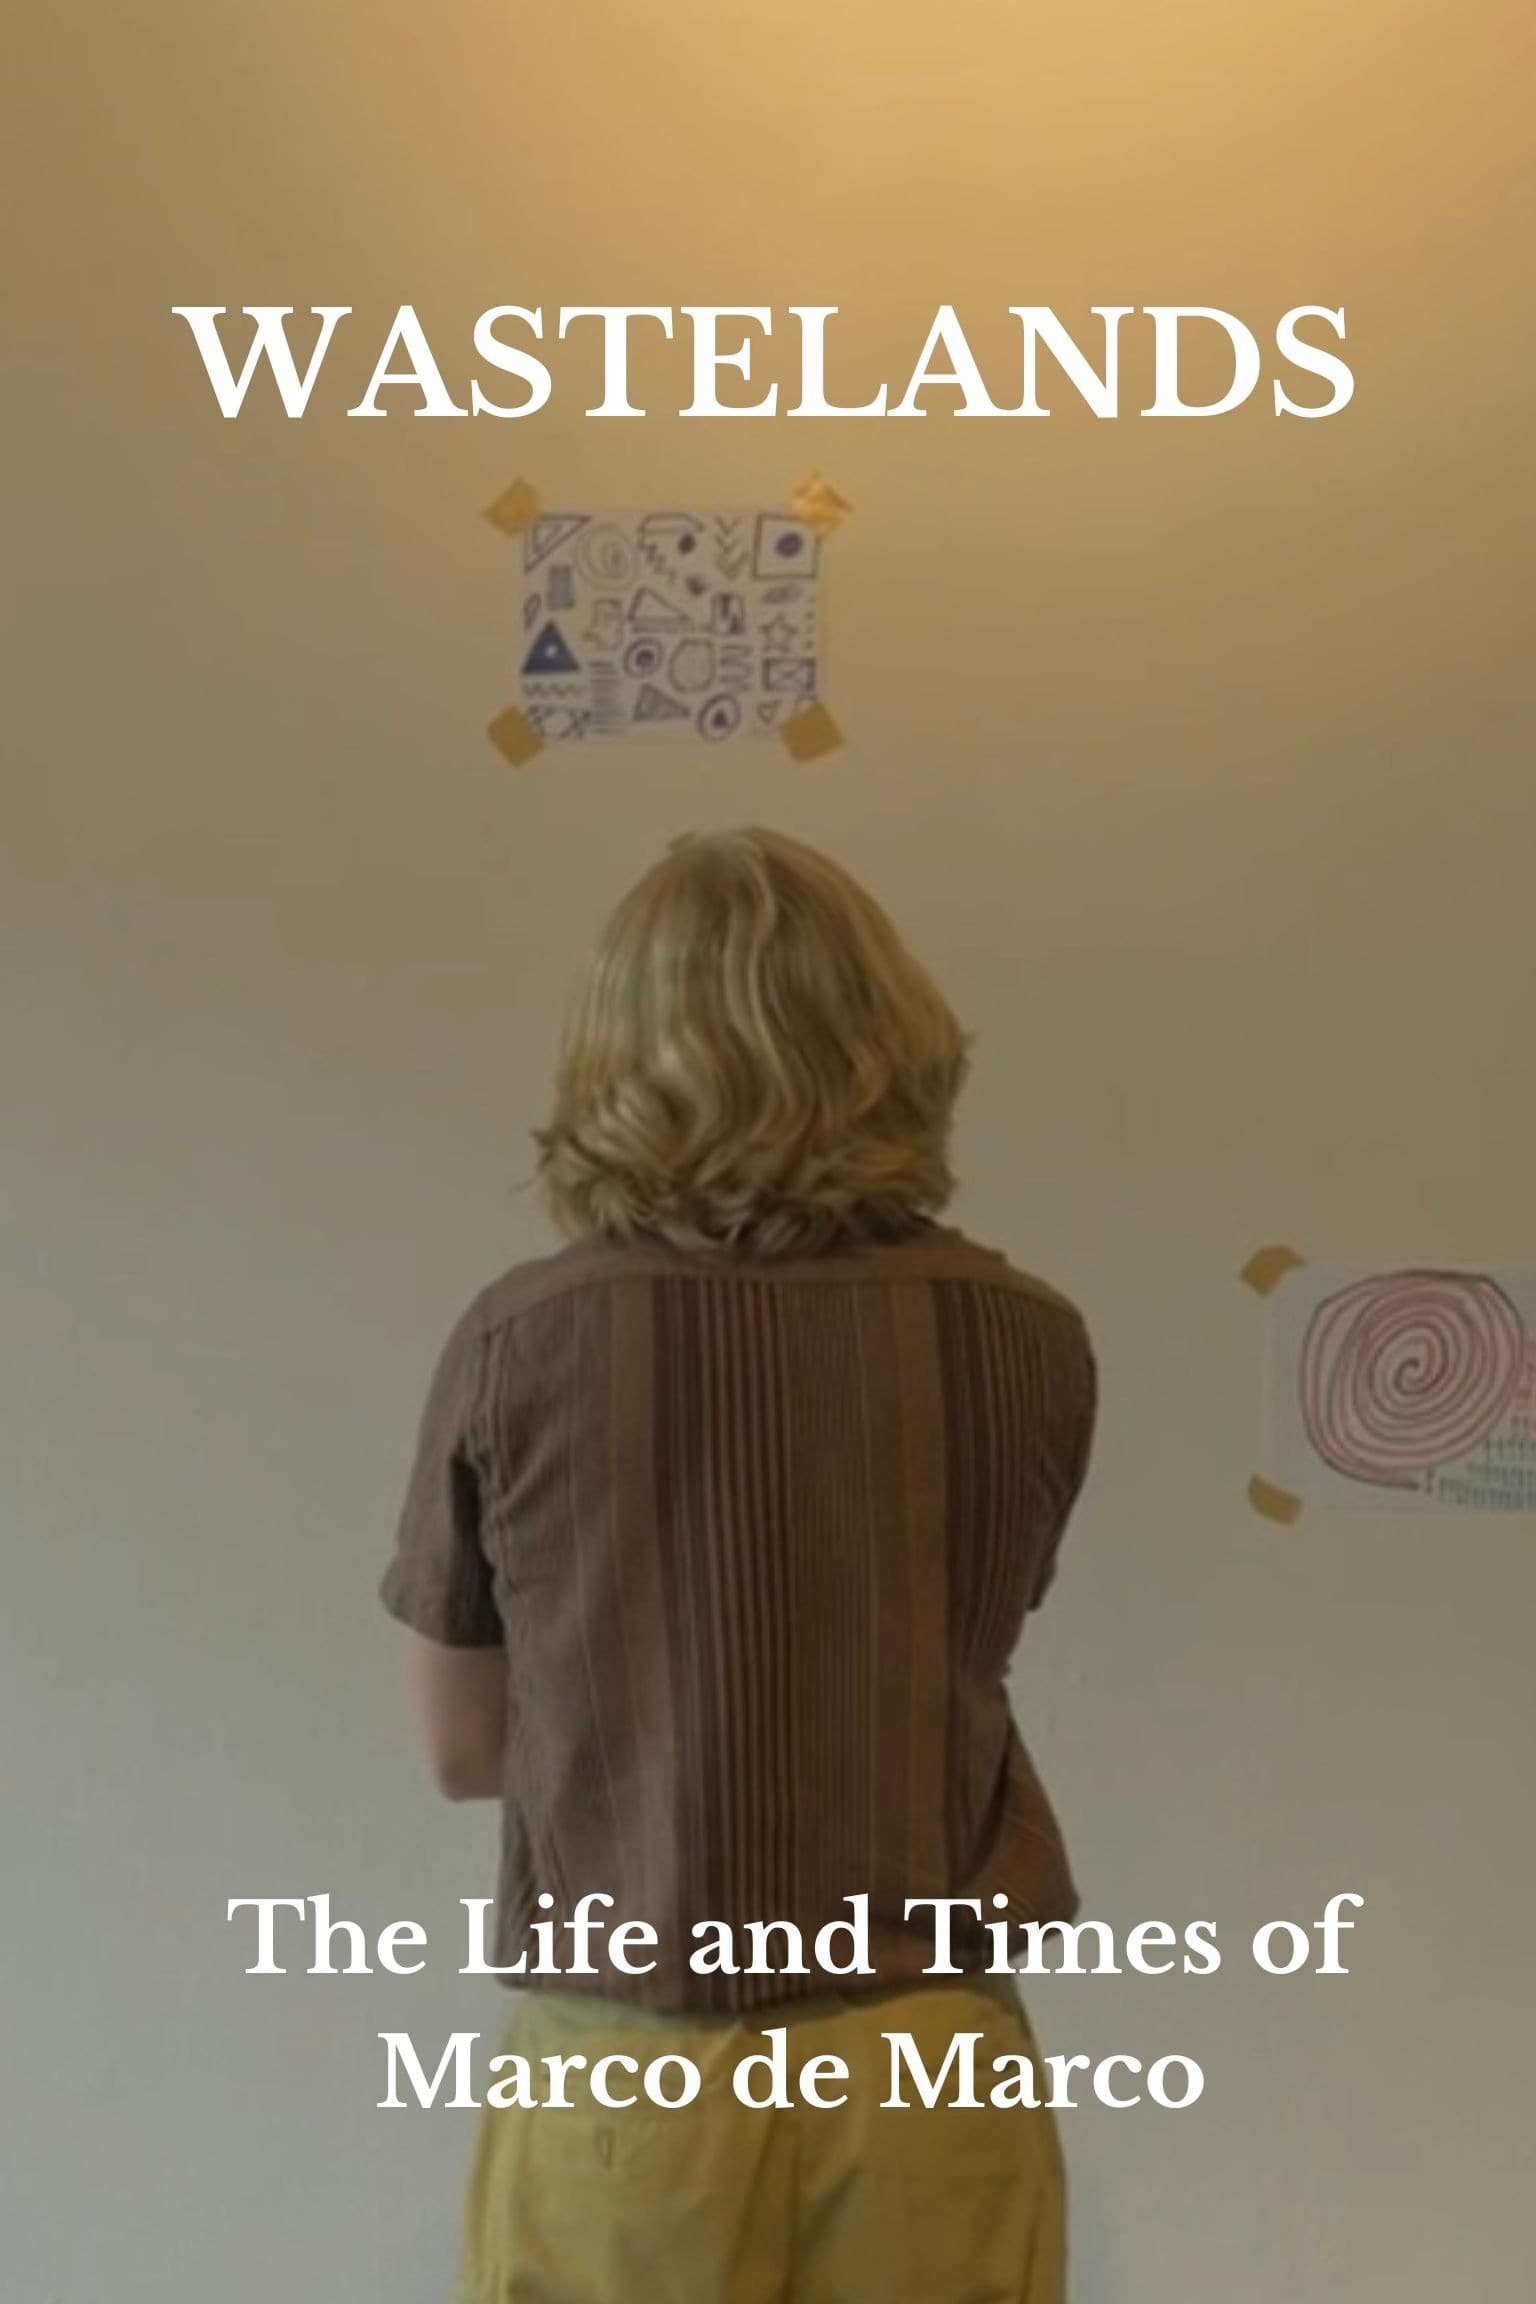 Wastelands: The Life and Times of Marco de Marco